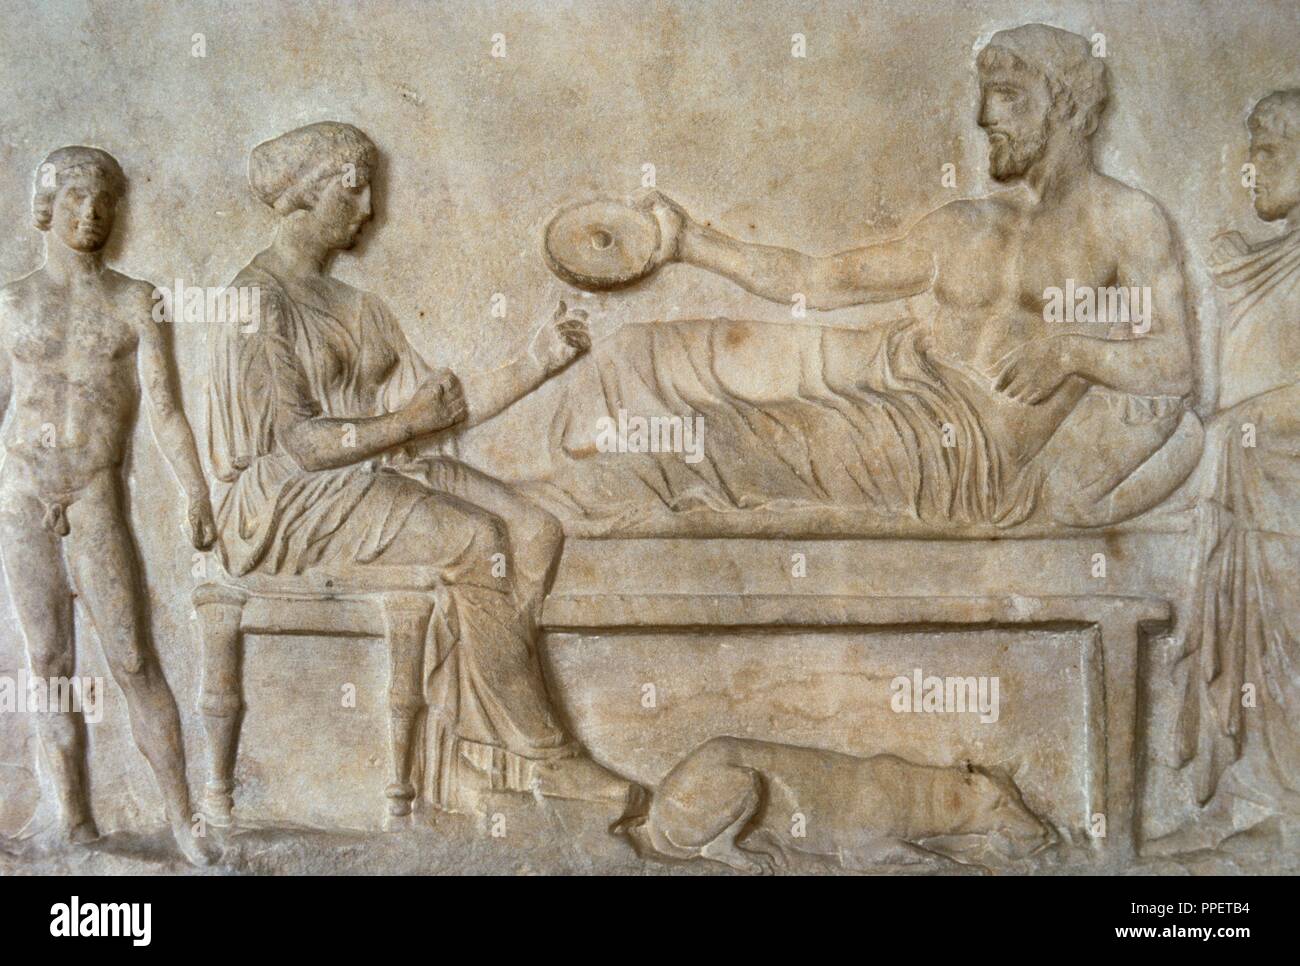 Greek art. Classical period. Grave stele. Relief. Funerary banquet scene. The man lying holding in his hand a 'Philae' and a boy came from a crater serves. Dated in 400 BC, was found in the Asklepieion (Piraeus). National Archaeological Museum. Athens. Greece. Stock Photo